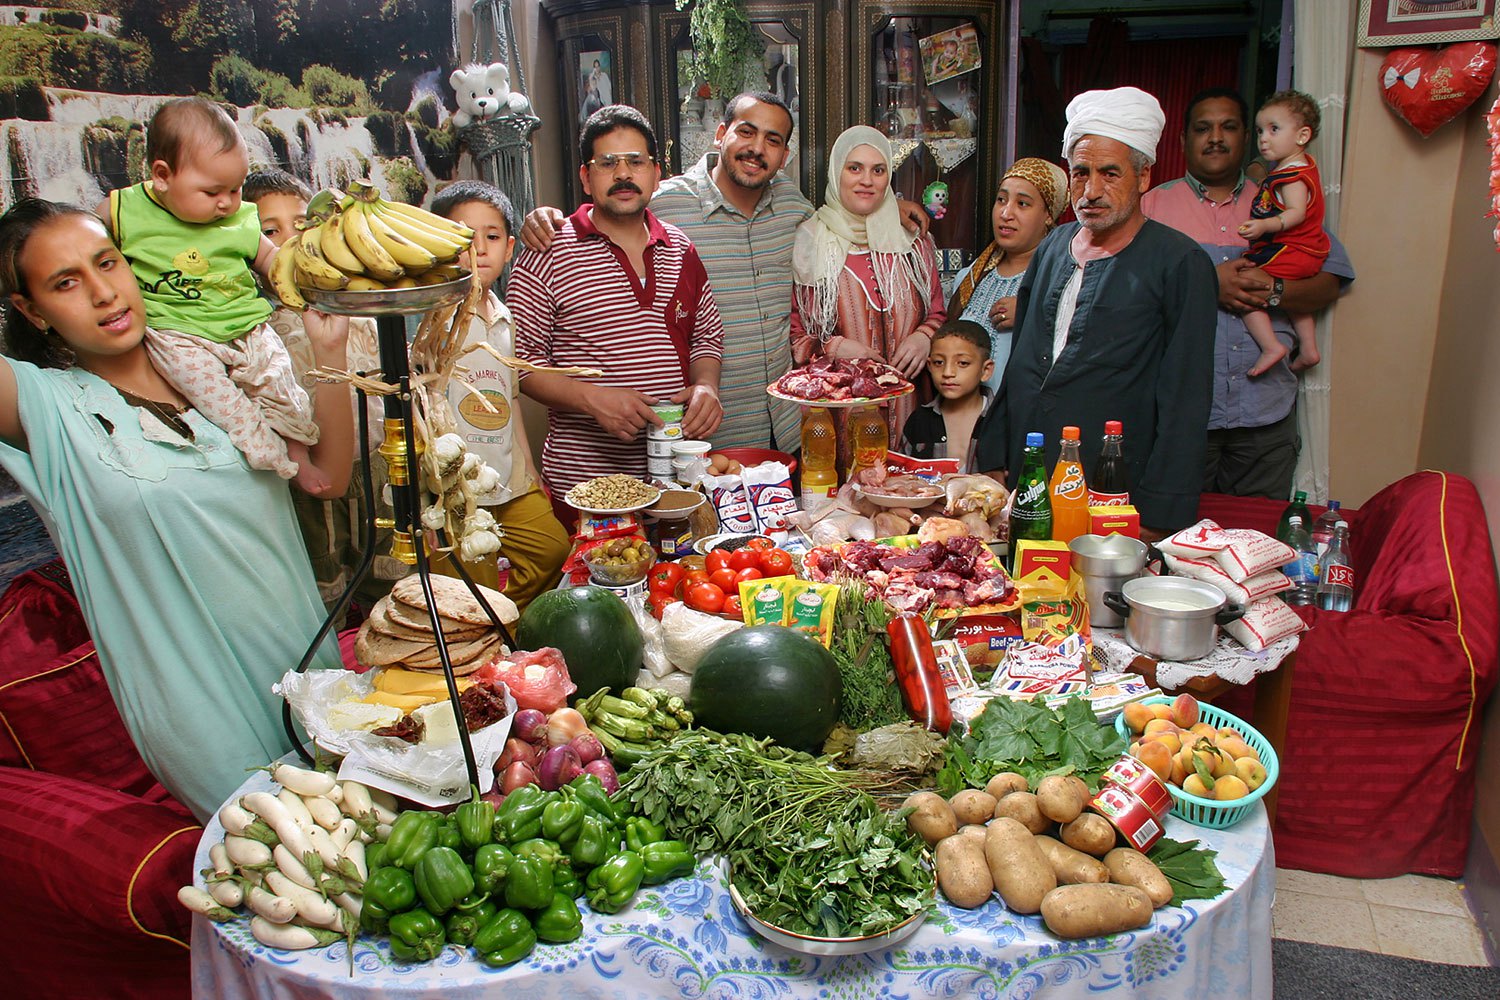 Egypt: The Ahmed family of Cairo. Food expenditure for one week: 387.85 Egyptian Pounds or $68.53. Family recipe: Okra and mutton.